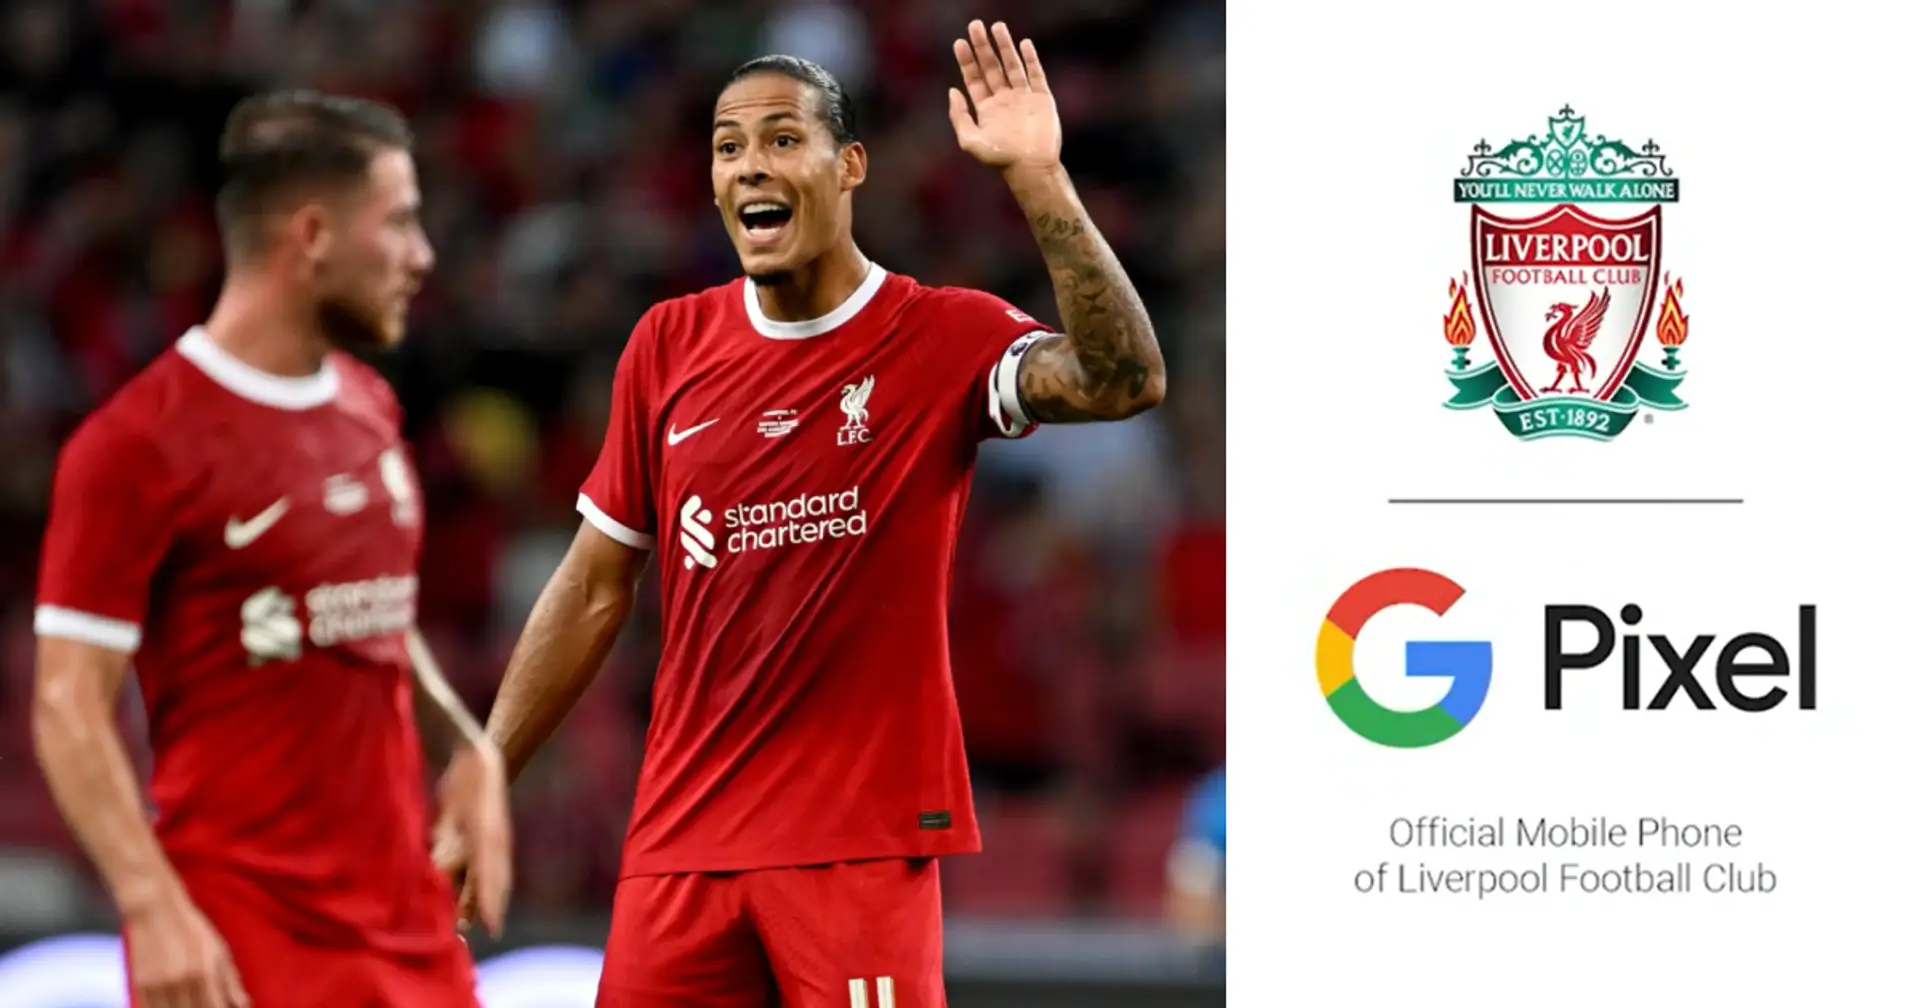 Liverpool announce sponsorship deal with Google and 2 more under-radar stories